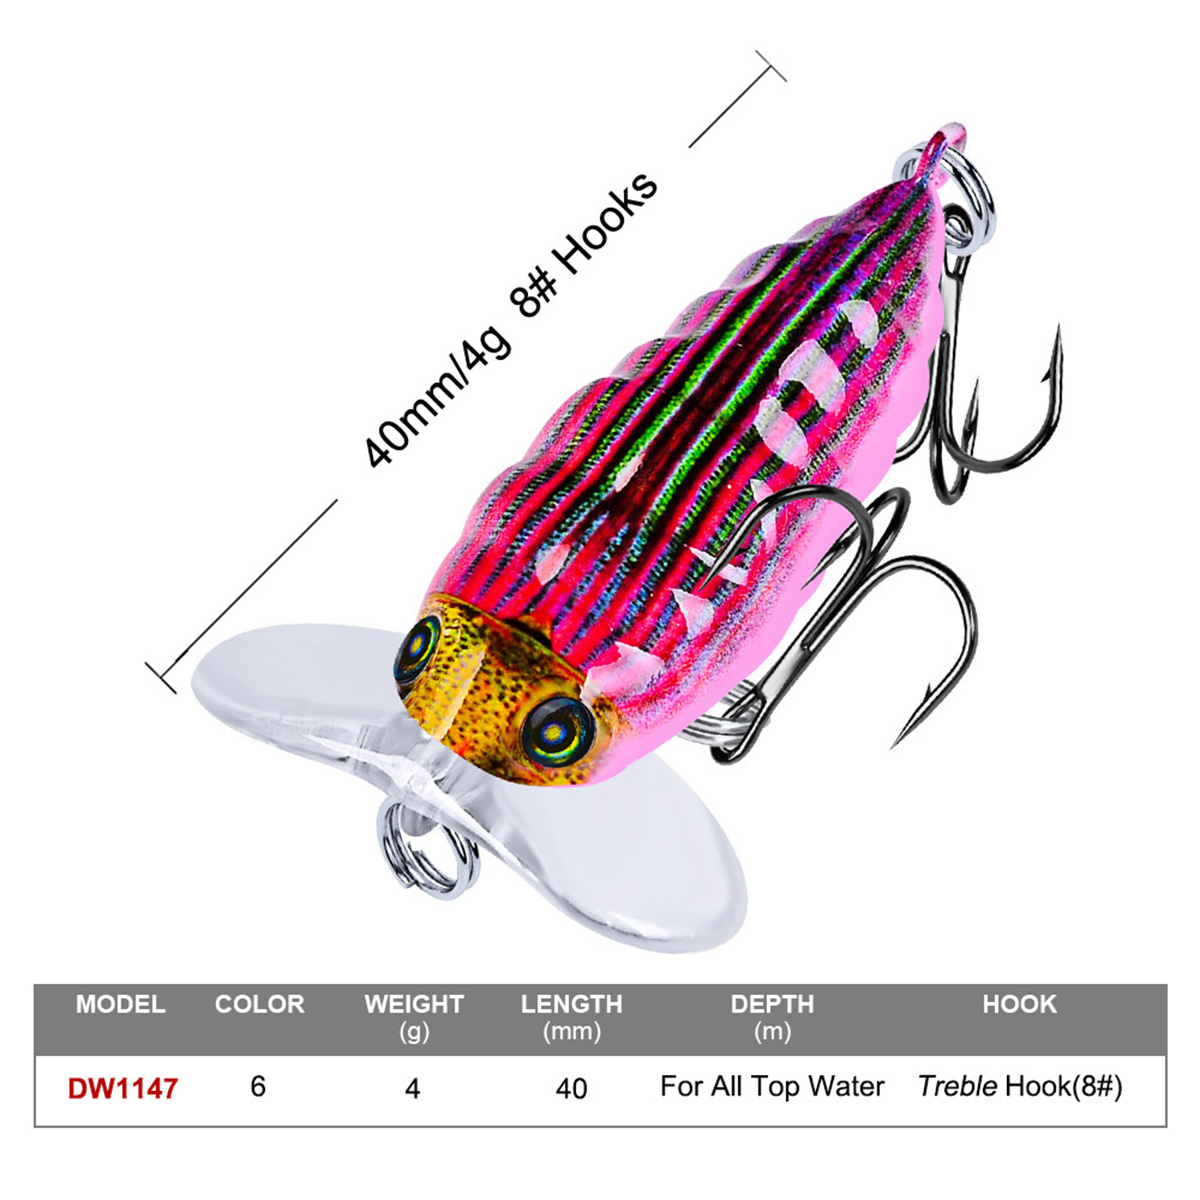 ZANLURE-1Pcs-4cm4g-Popper-Artificial-Insect-Sytle-Topwater-Fishing-Lure-8-Treble-Hook-1611036-5